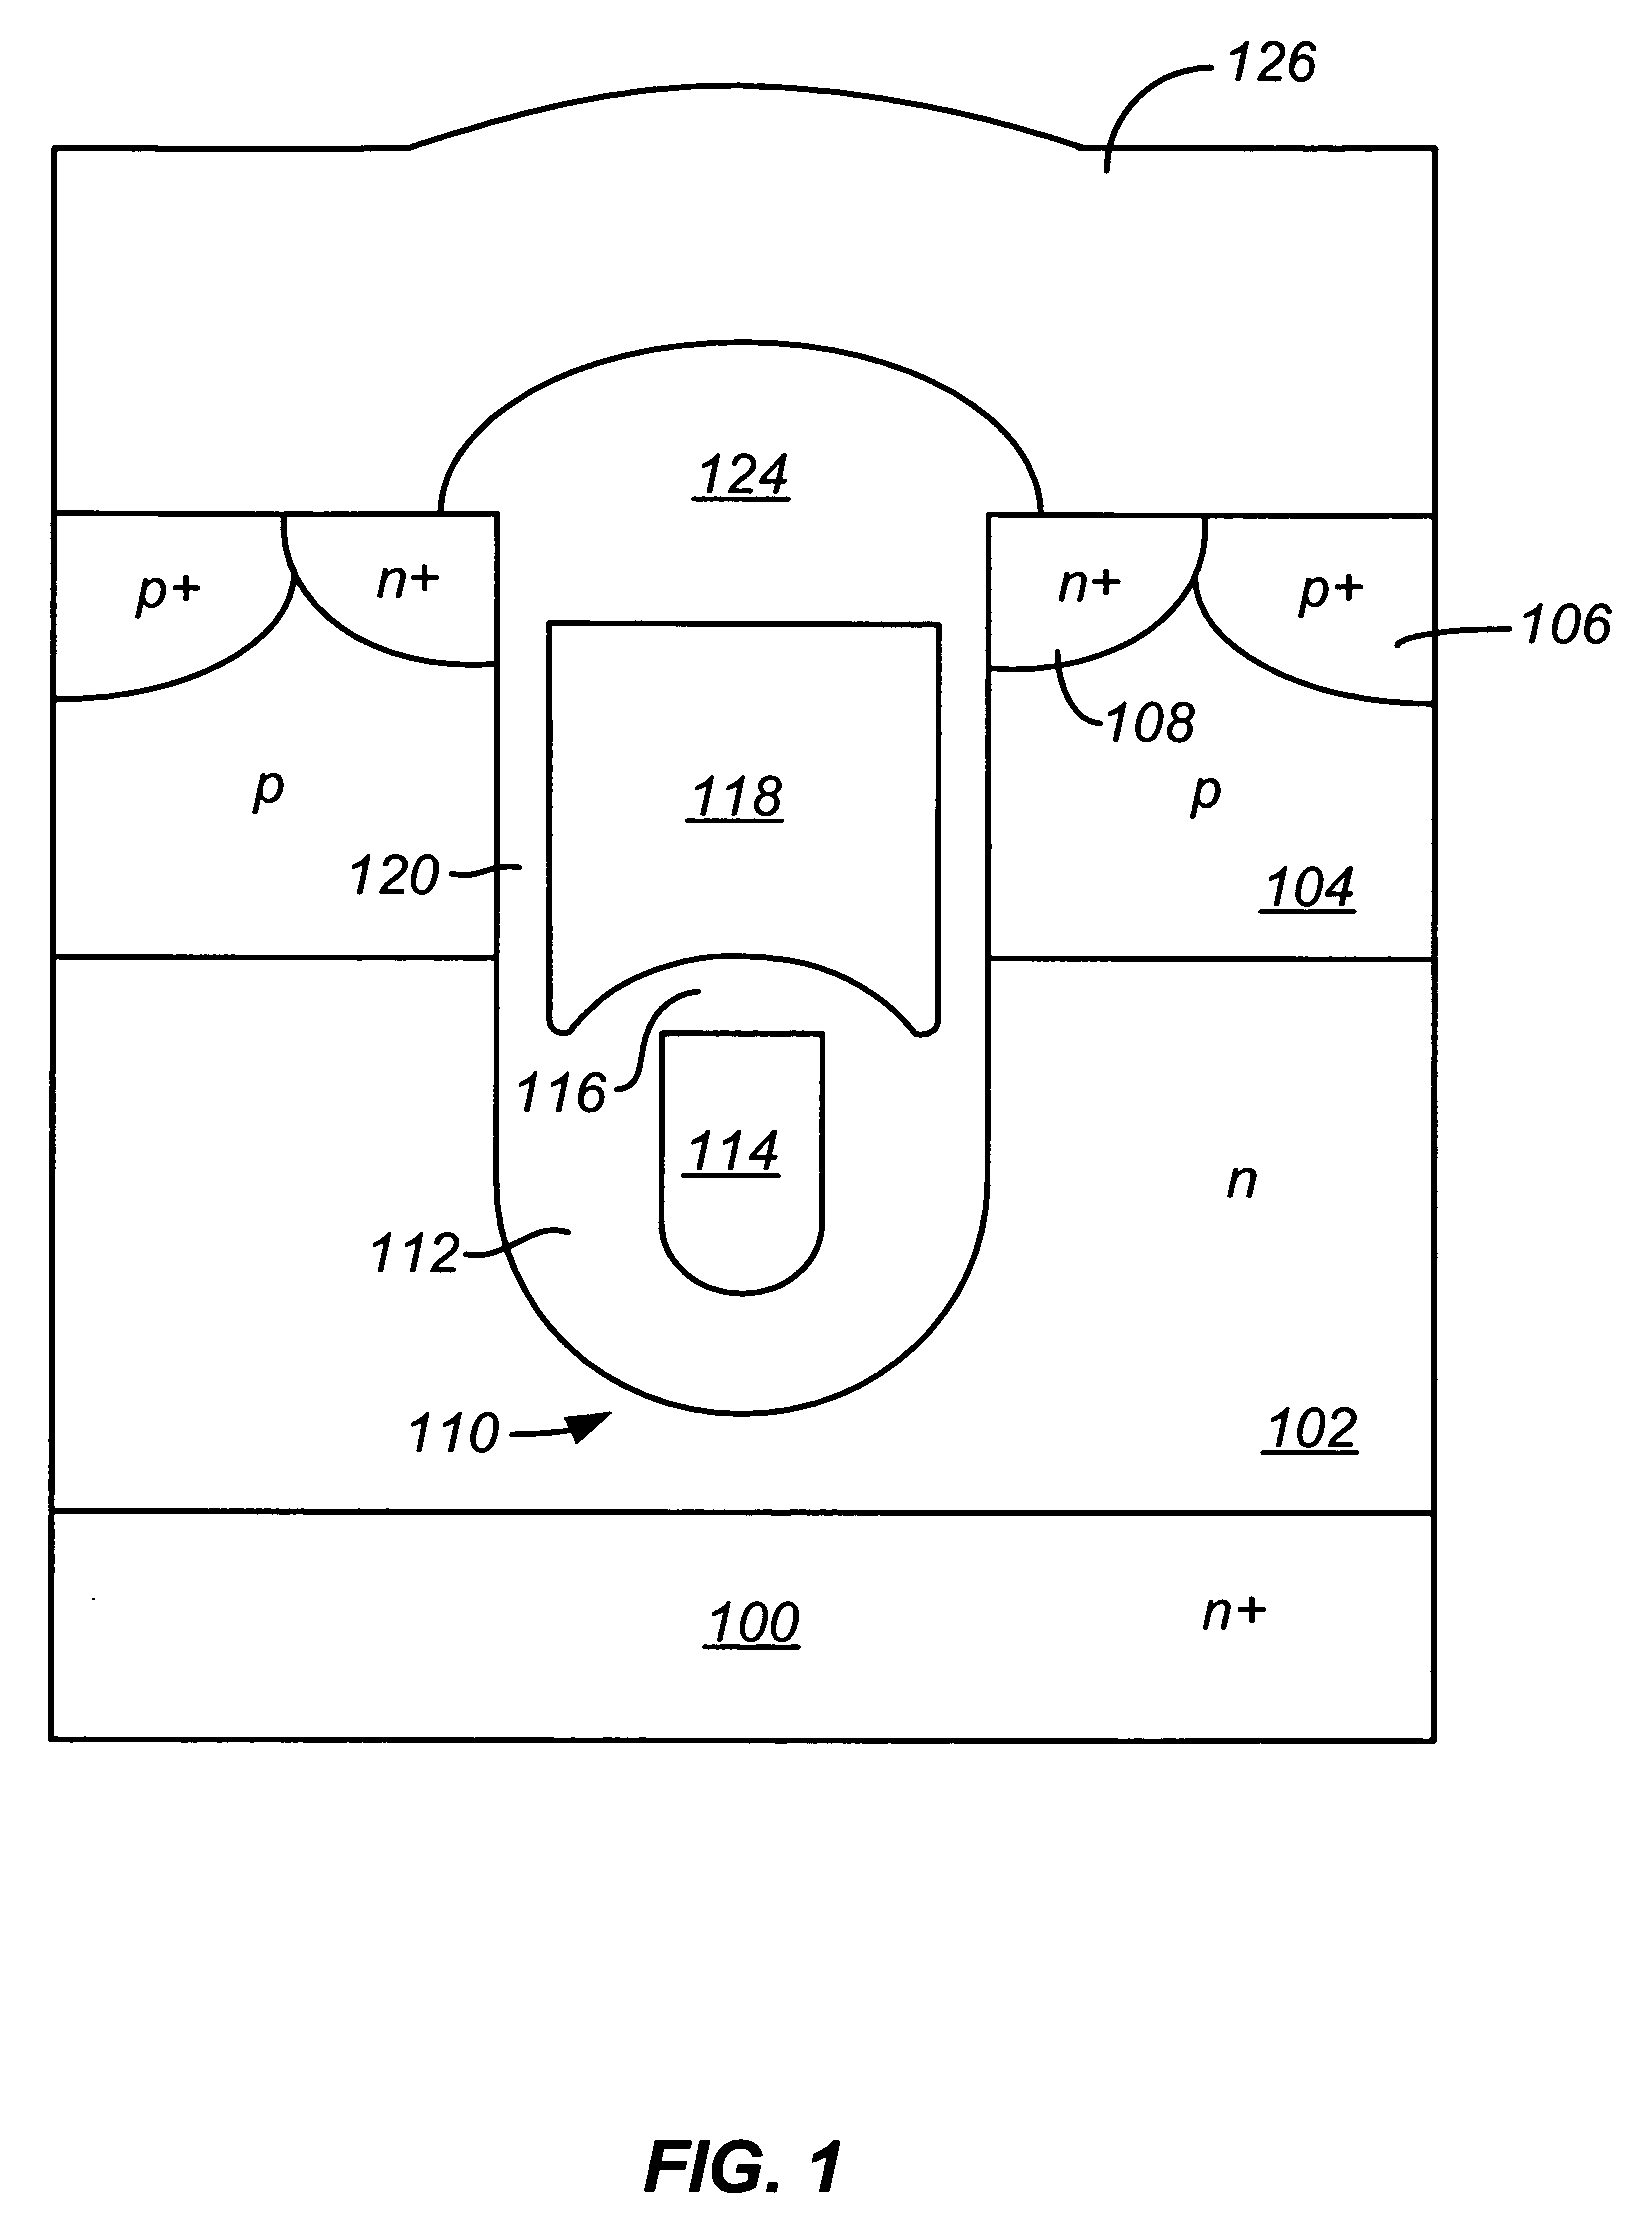 Structures and methods for forming shielded gate field effect transistors